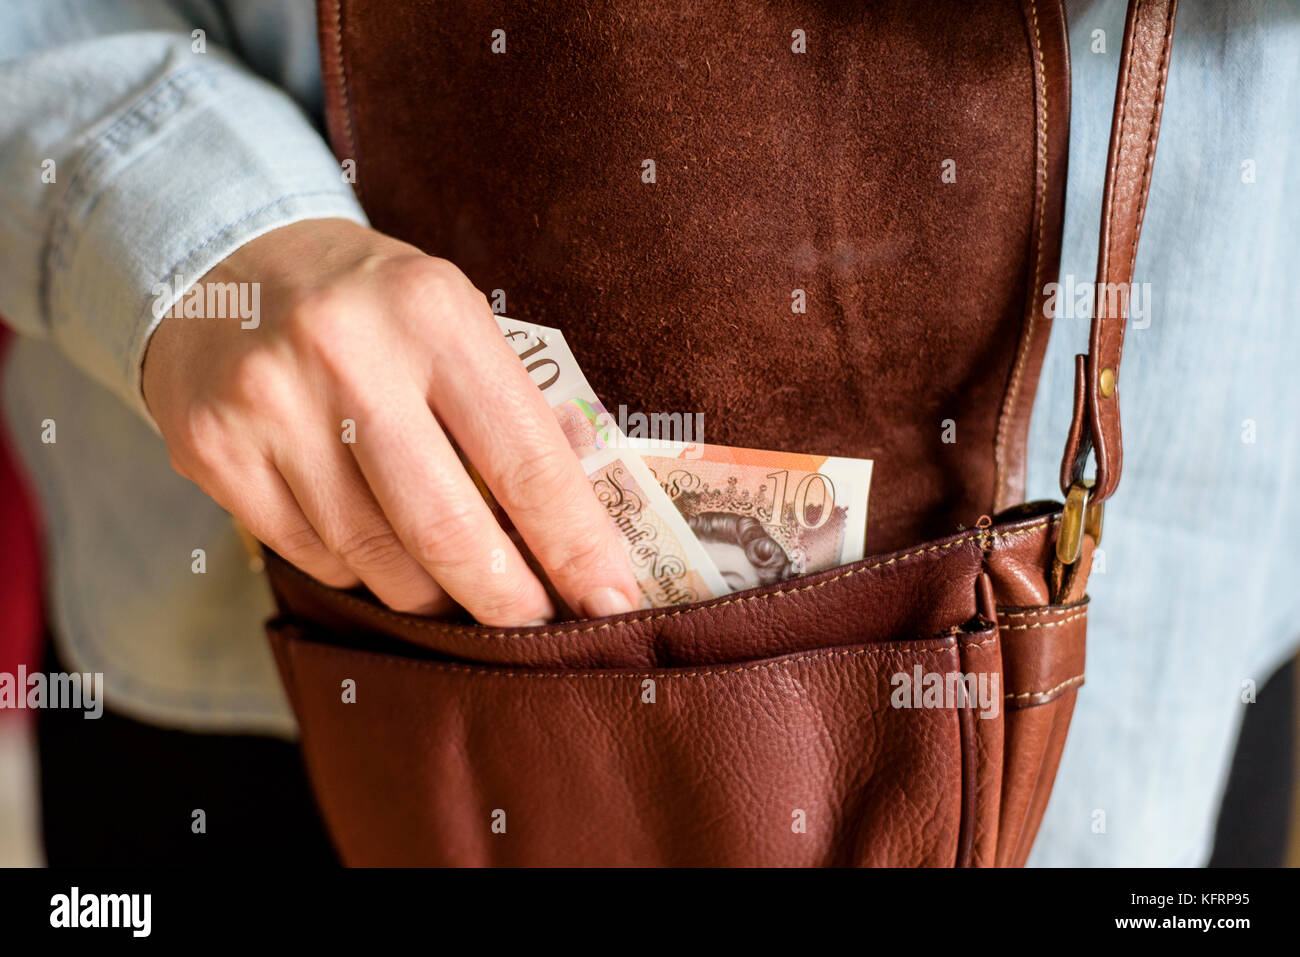 Stock photo of a woman taking some 10 pound notes out of her purse. Close up on the hand and the money. Stock Photo